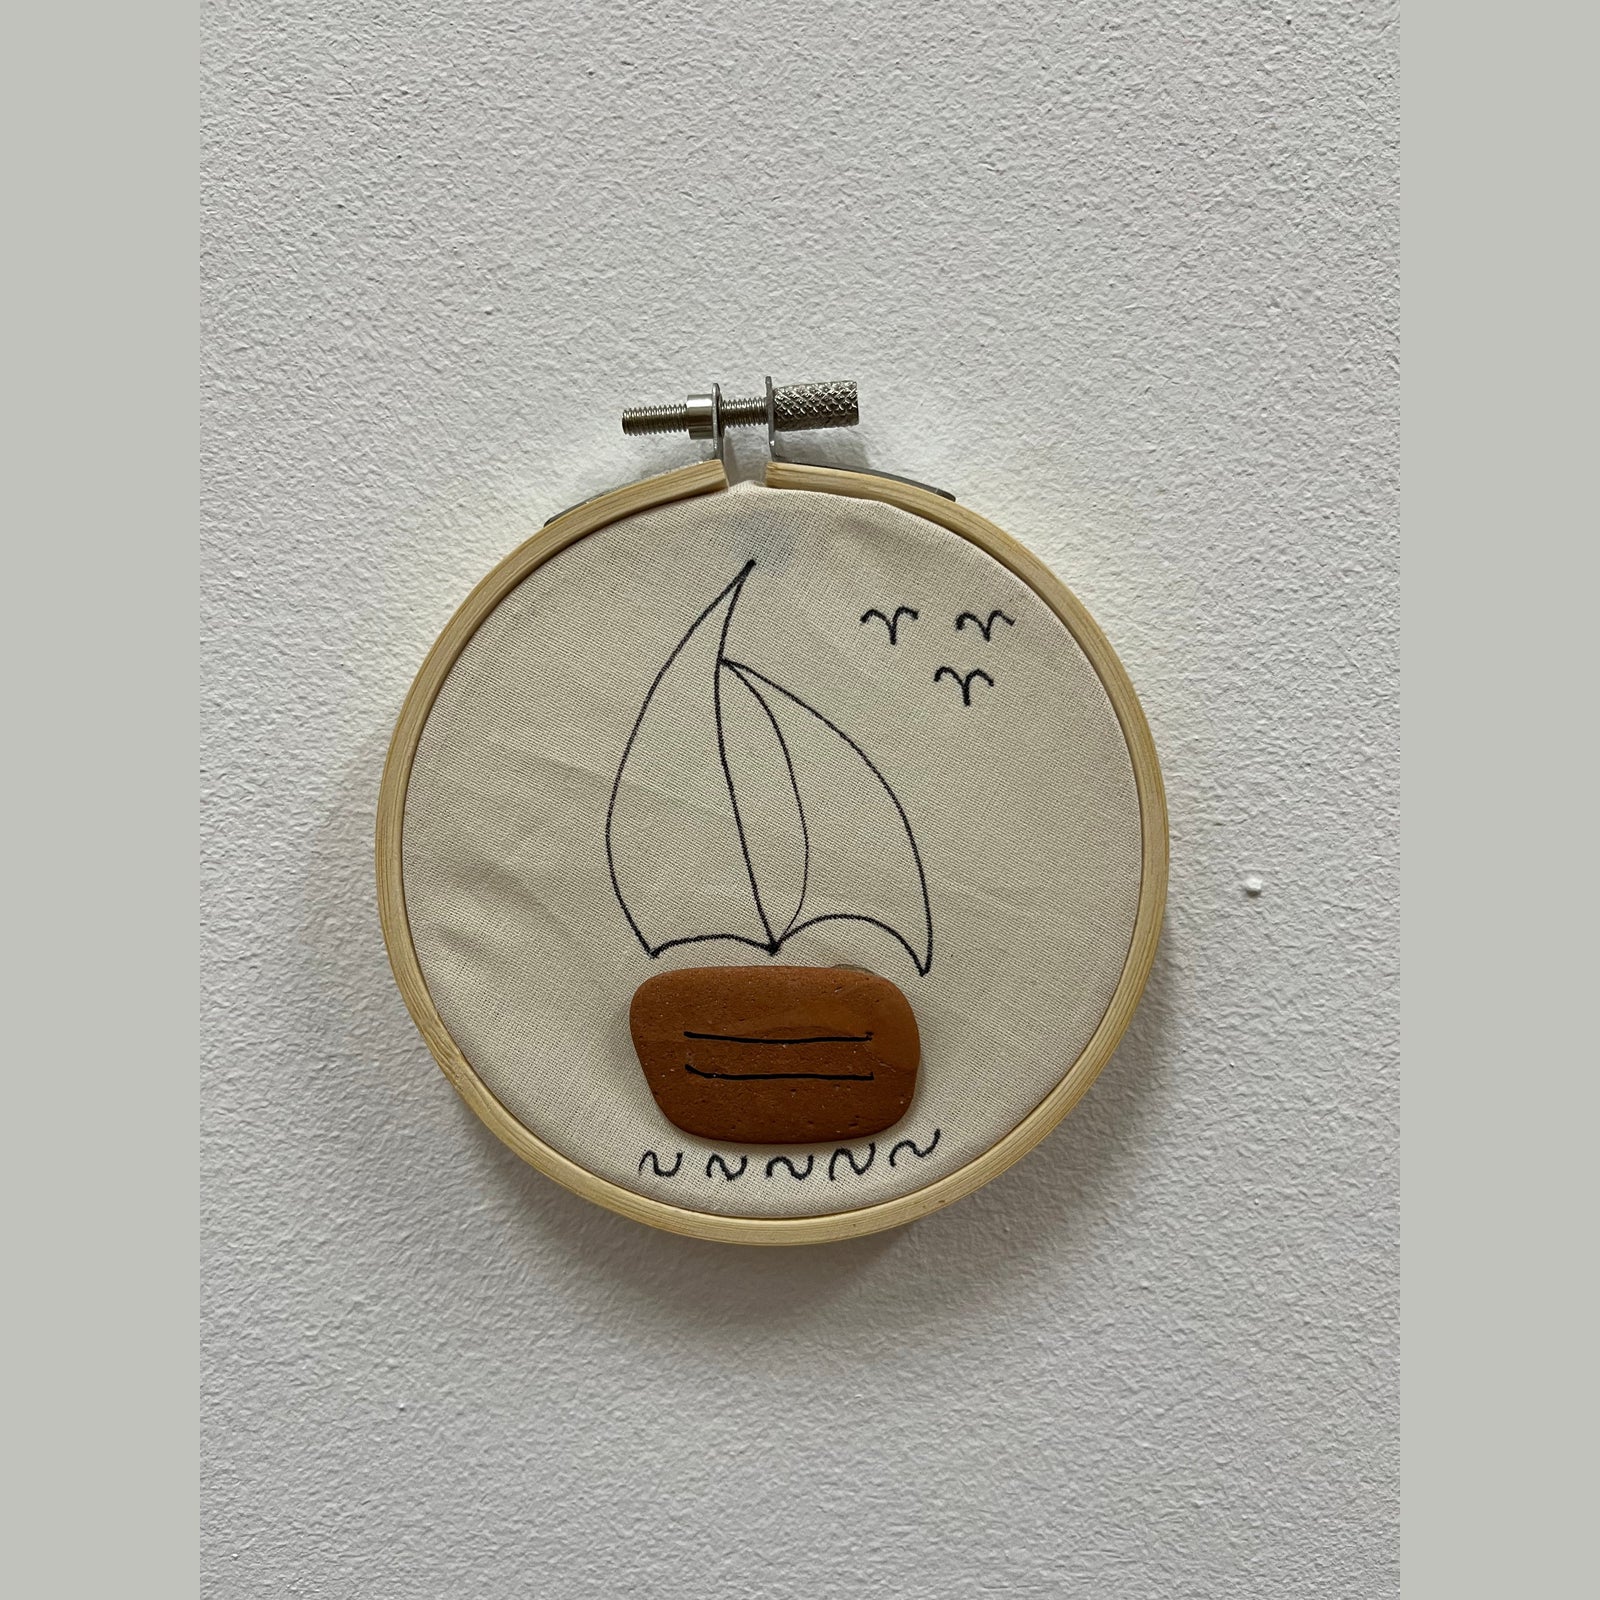 Pebbles In Ring - Sailing Boat